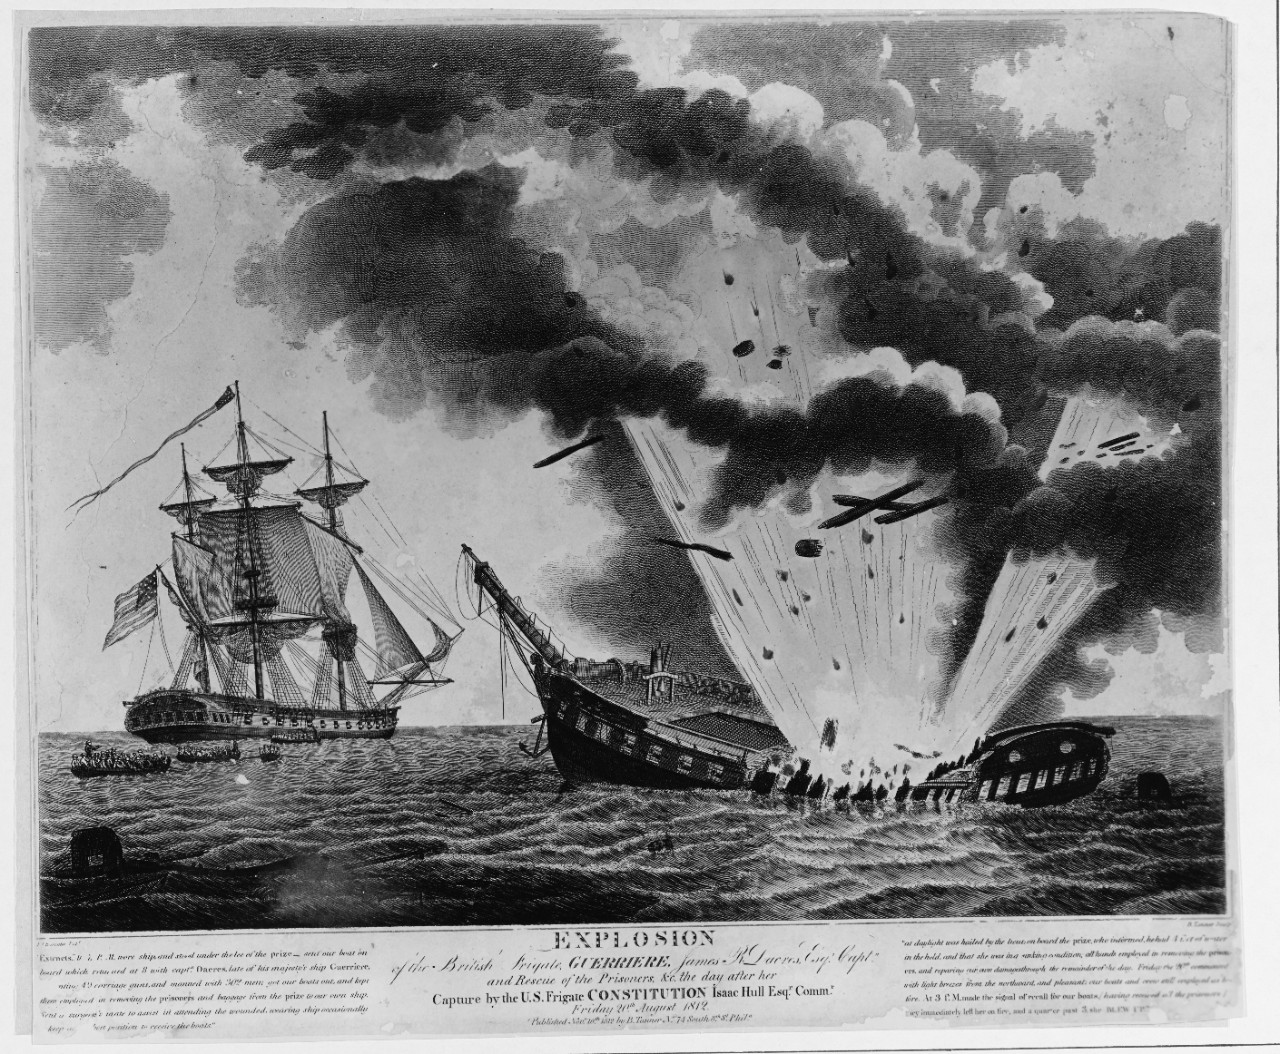 Photo #: NH 42067  Action between USS Constitution and HMS Guerriere, 19 August 1812